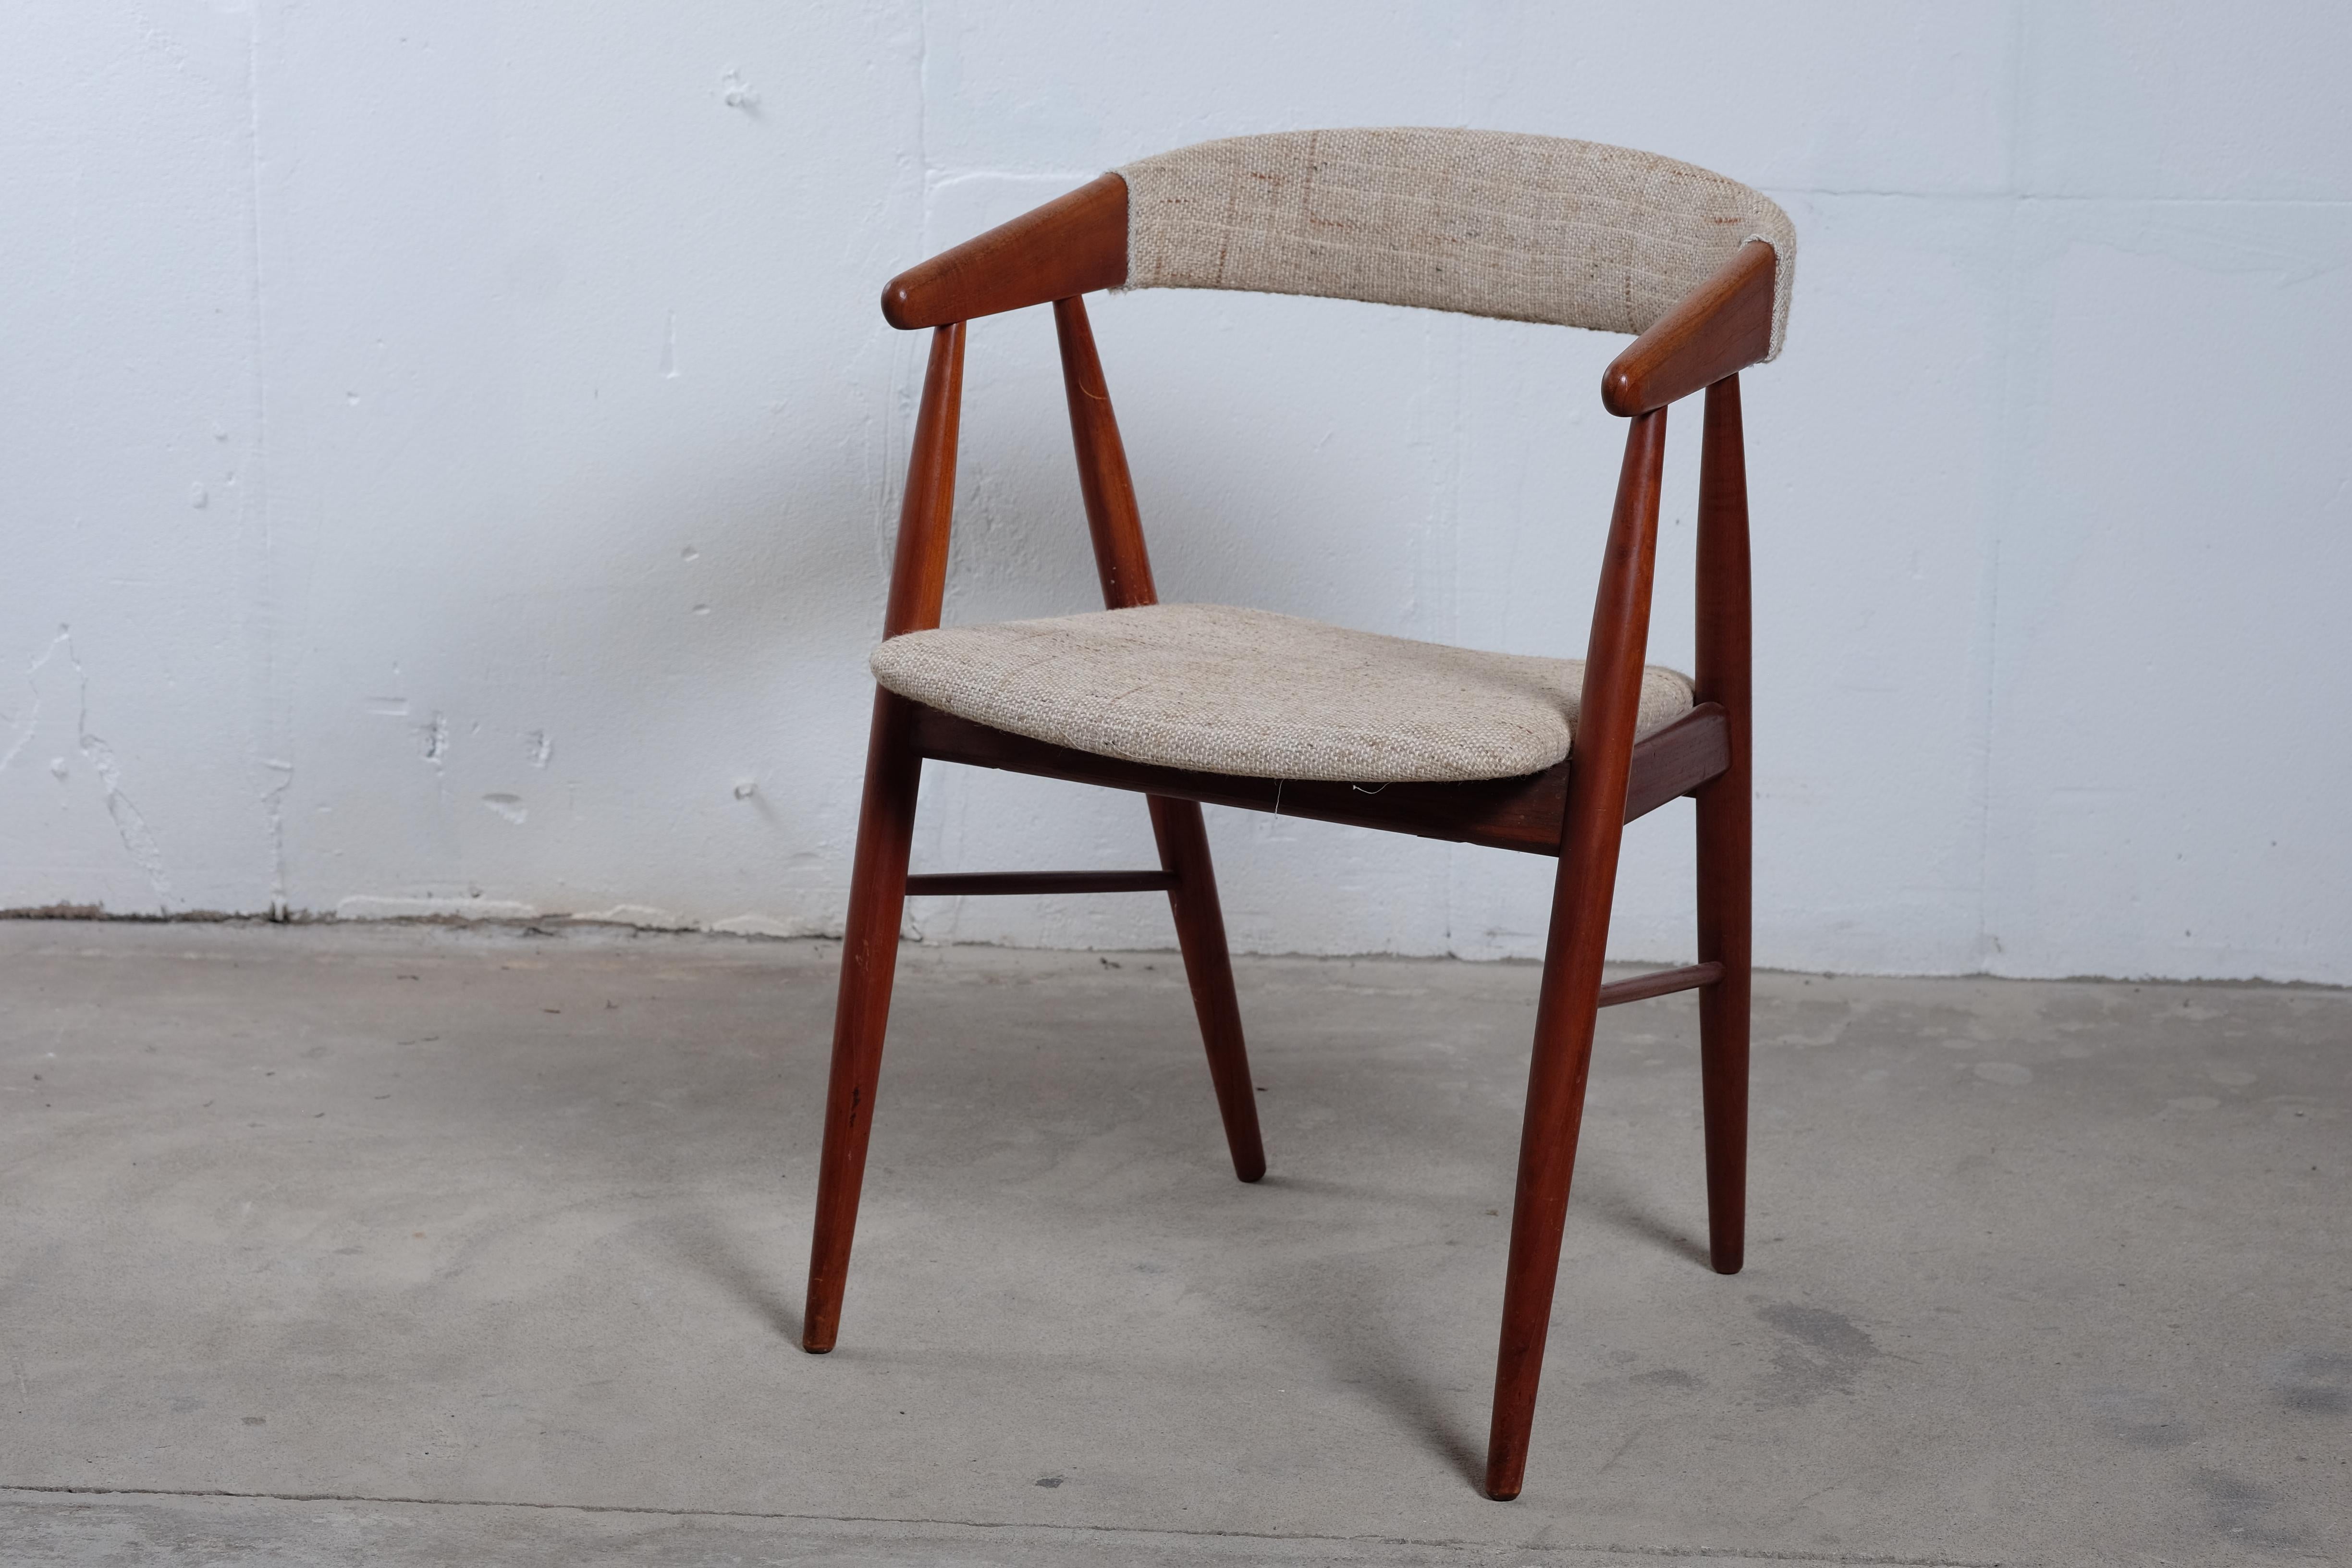 Midcentury Danish Teak Dining Chairs, Set of 4 In Good Condition For Sale In Middelfart, Fyn